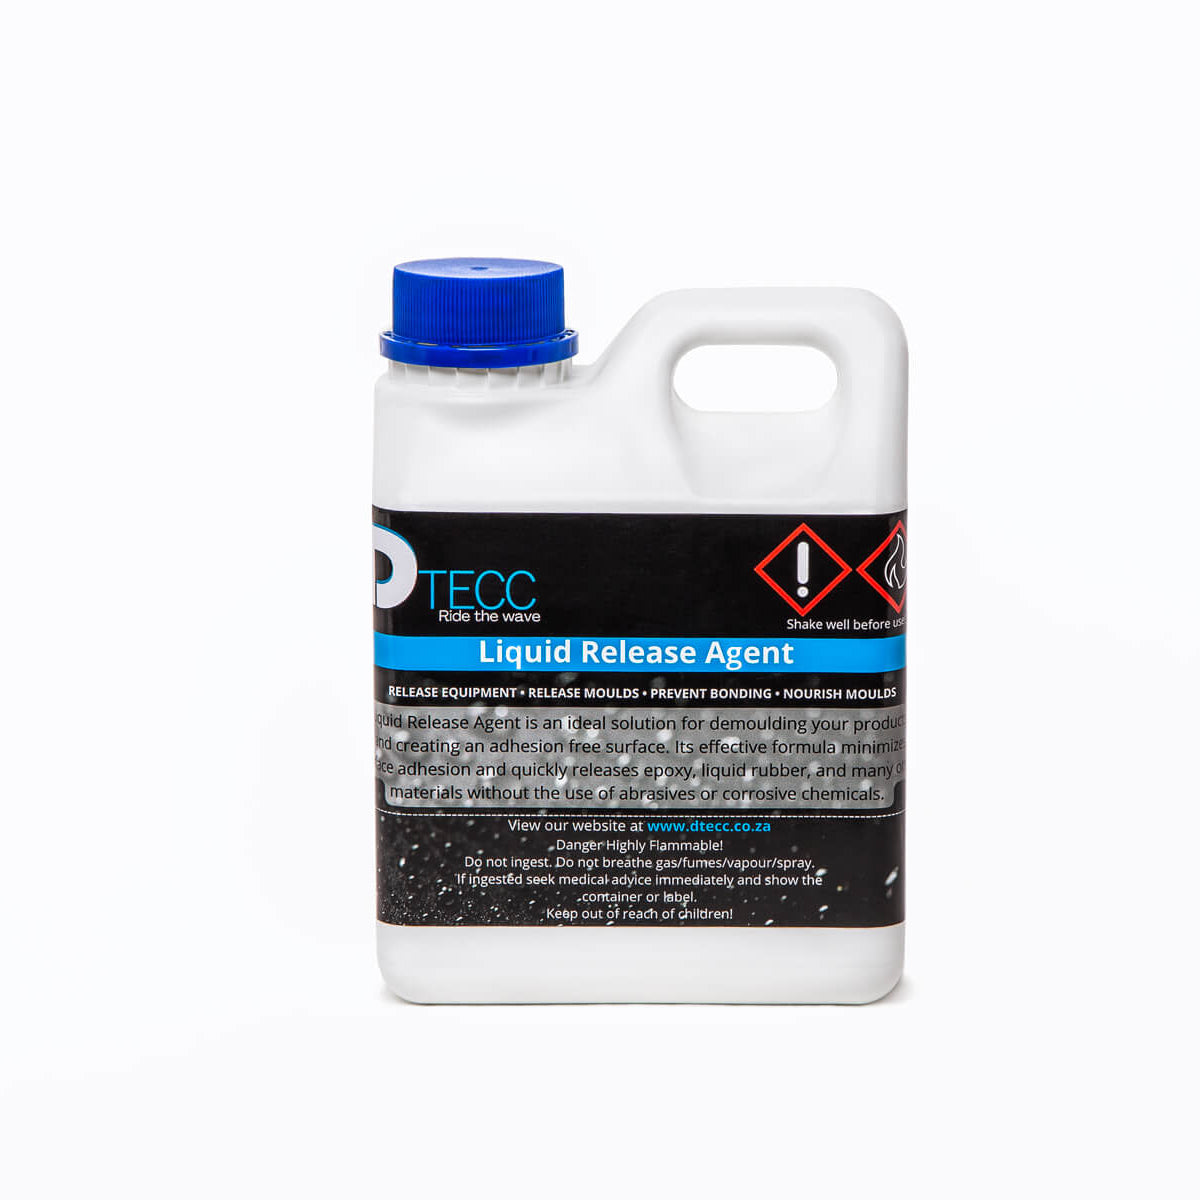 800Ml Liquid Release Agent Used For Releasing Moulds